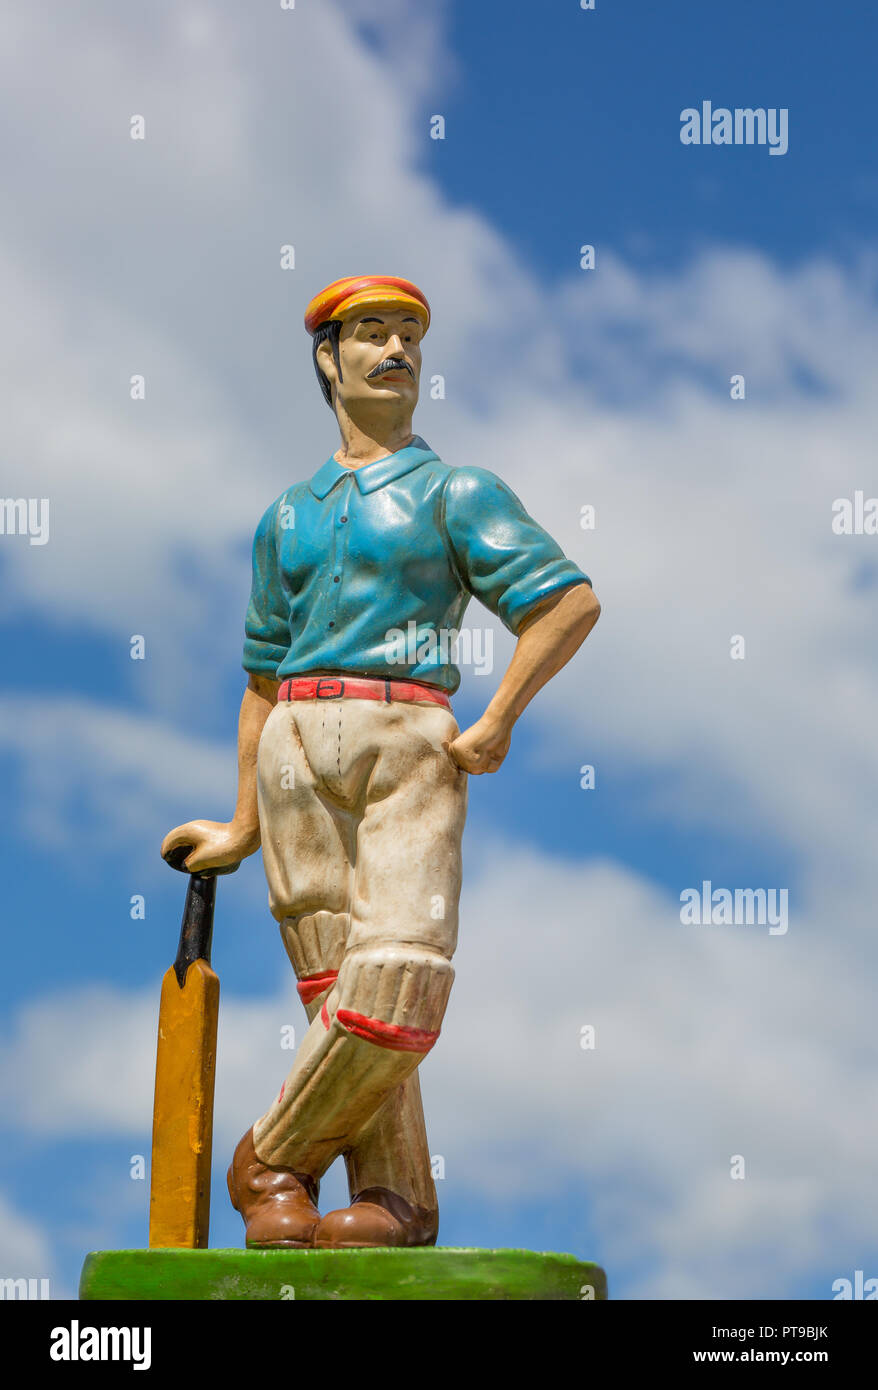 Detailed, portrait close up of vintage cricketer ornament against blue sky background. Stock Photo